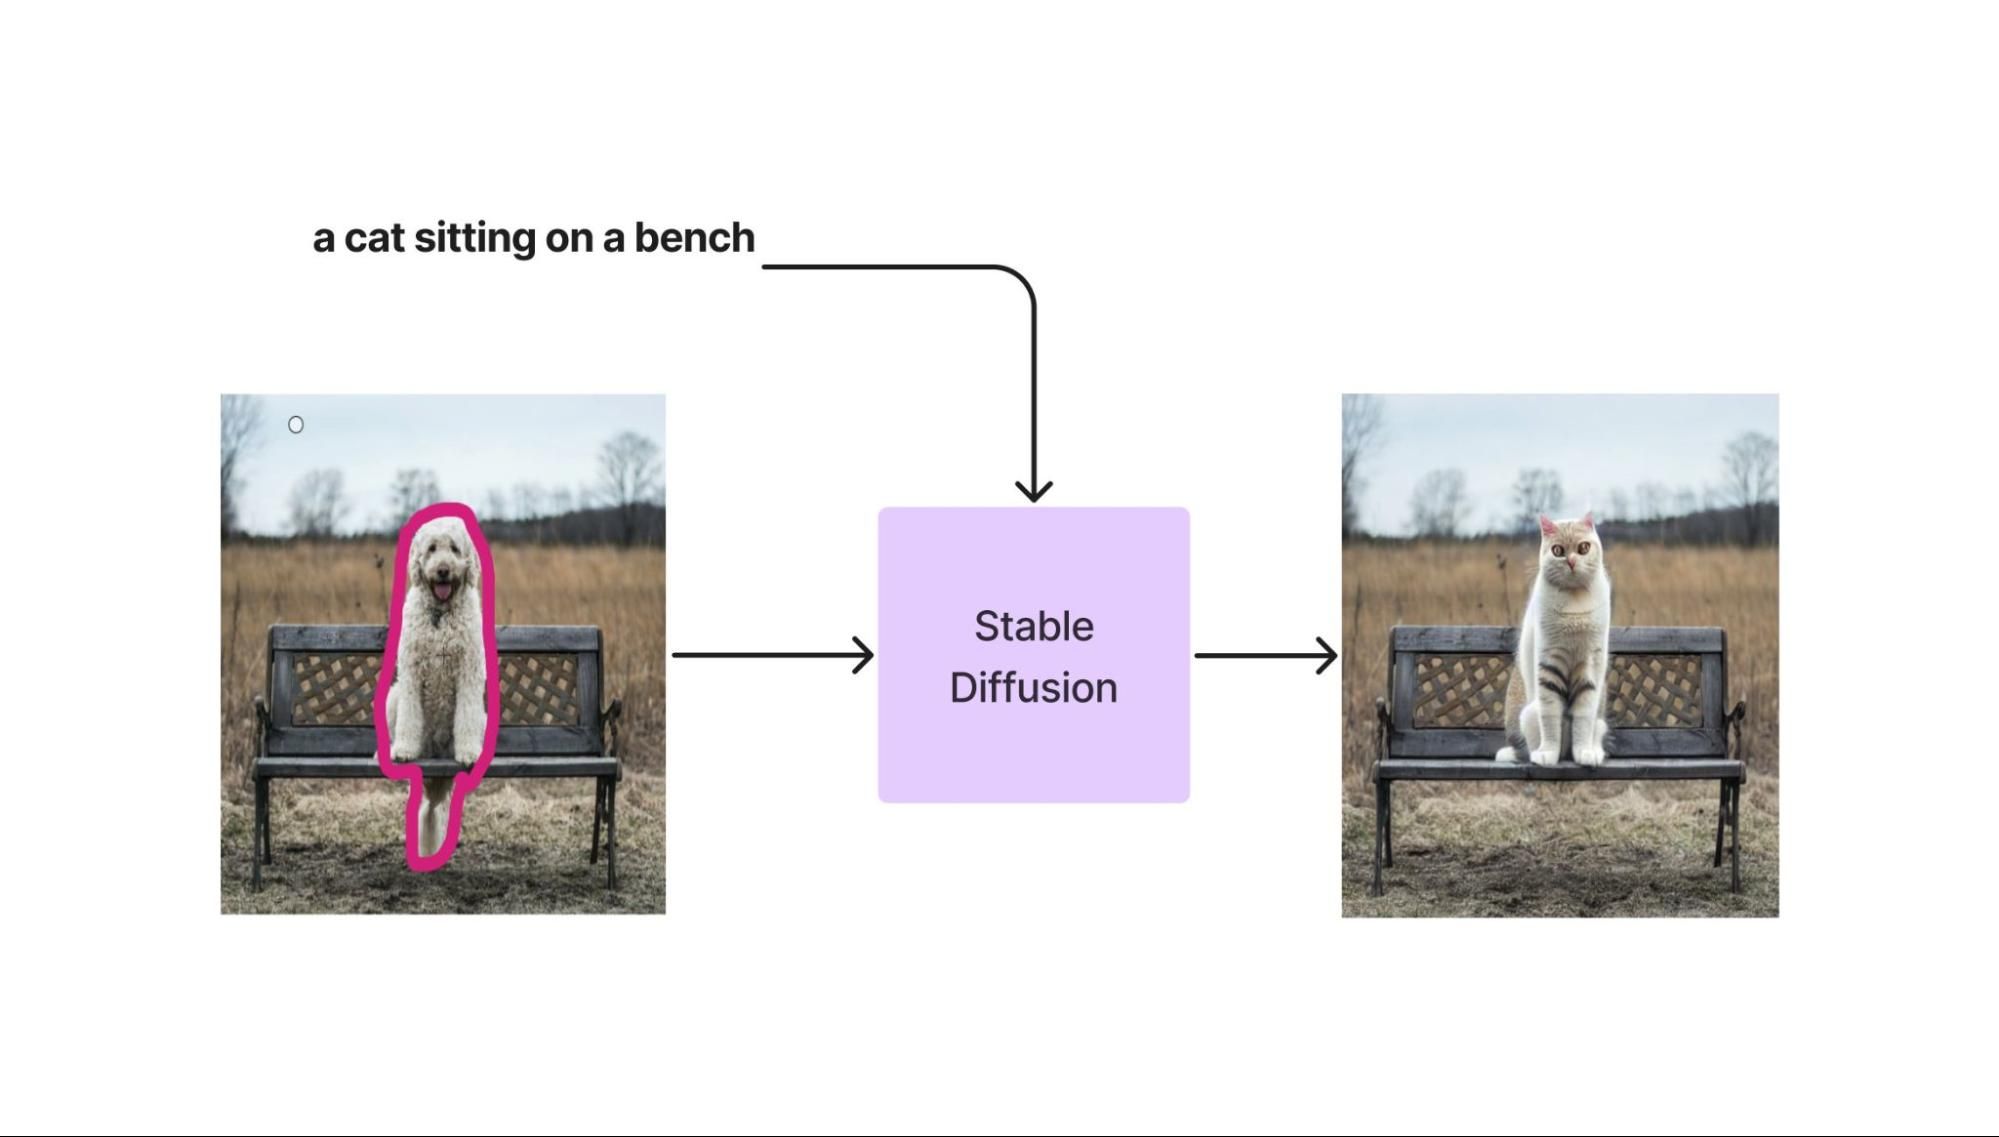 An image of a cat sitting on a bench before and after stable Diffusion